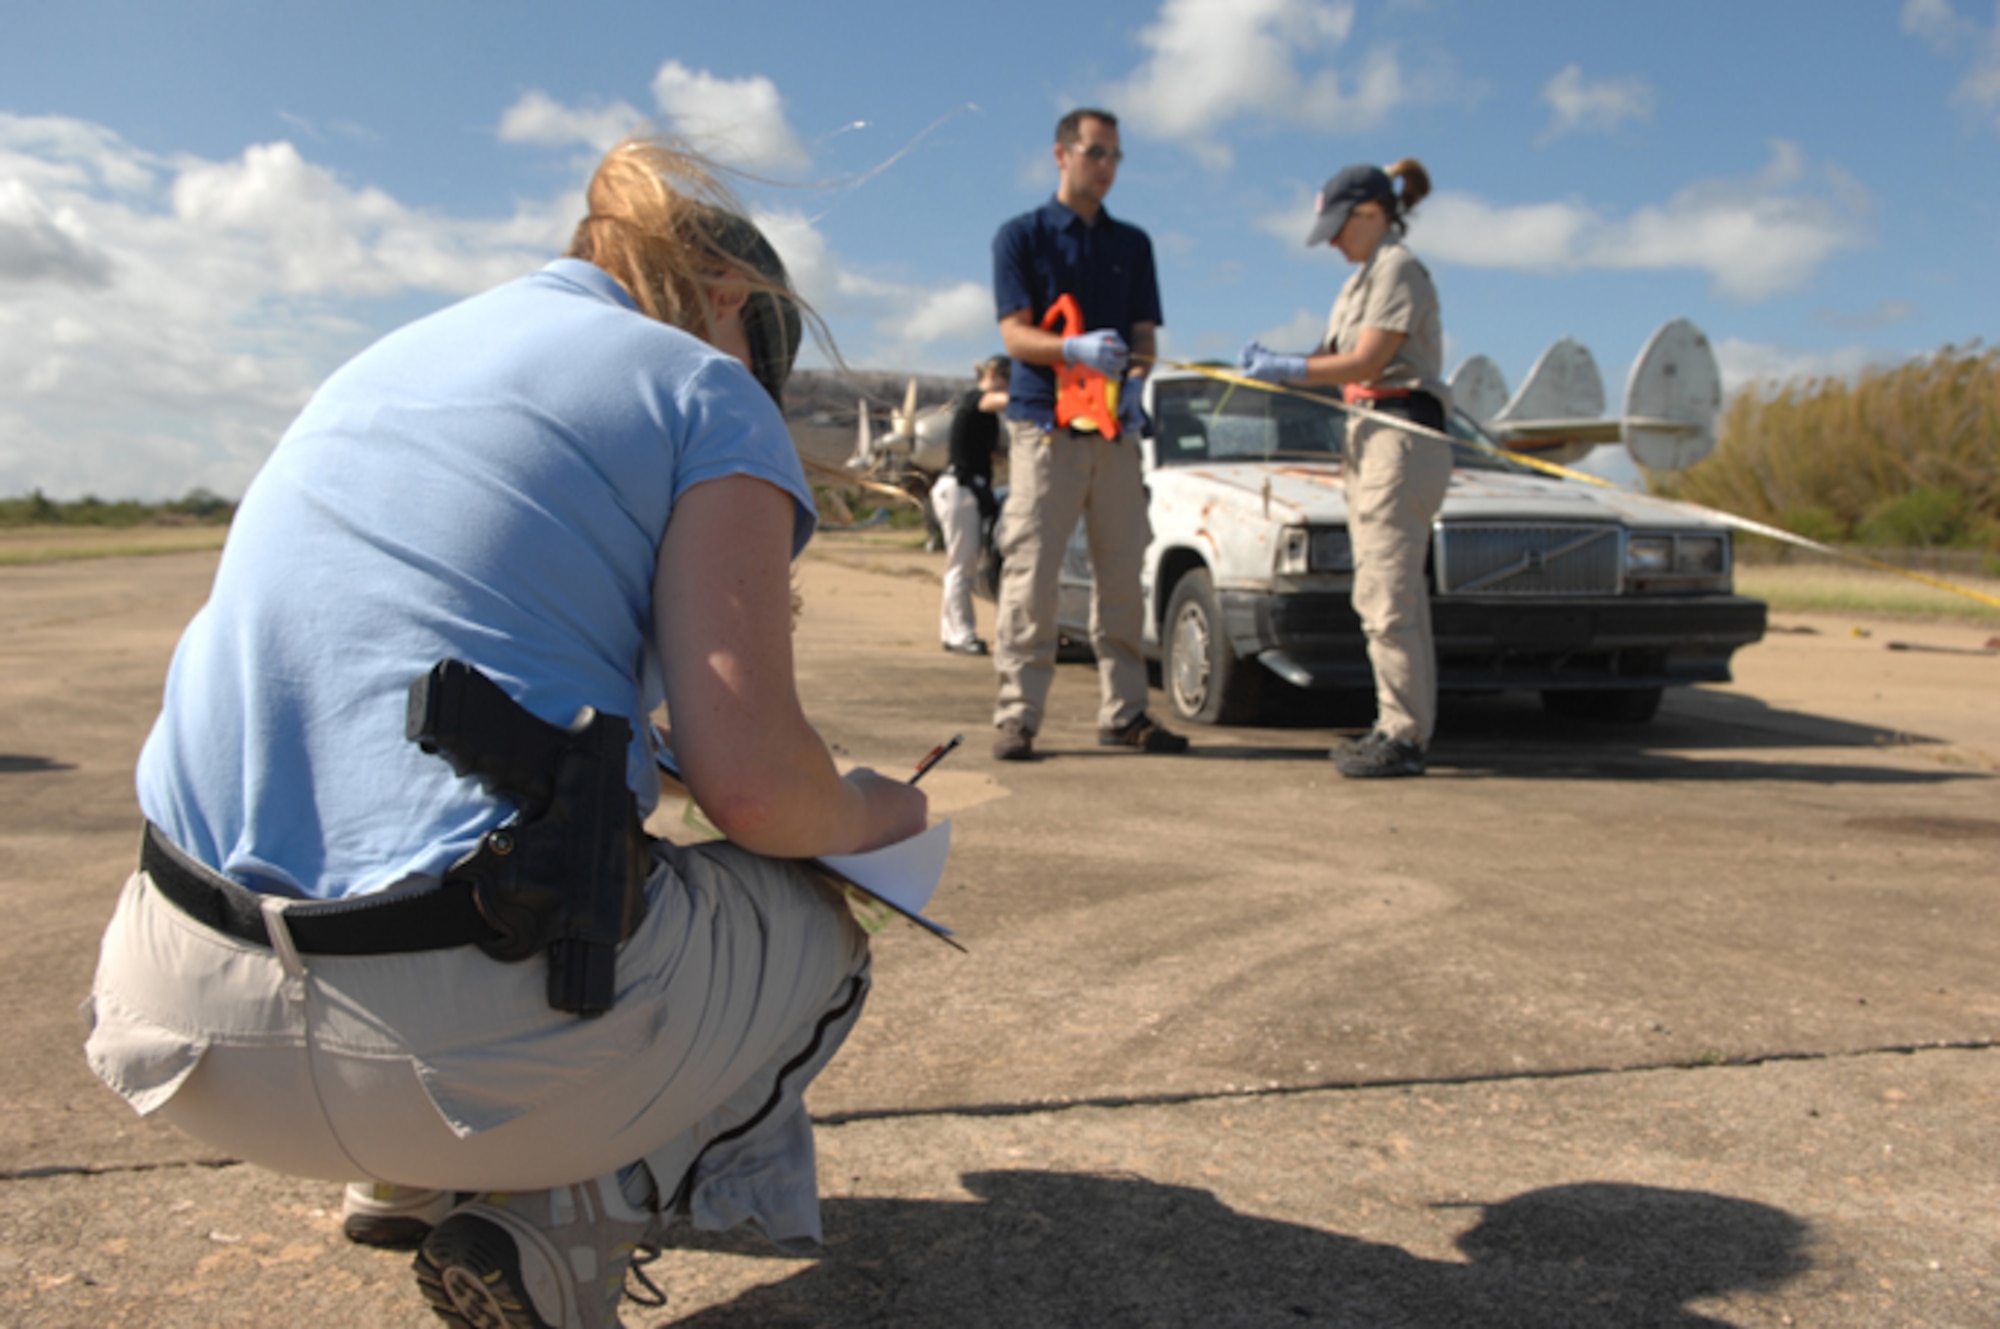 An FBI agent on a rapid deployment team sketches a car while processing a crime scene during Patriot Hoover 2009 at Ramey airfield in Aguadilla, Puerto Rico, on May 2, 2009. In addition to units from Air Force Reserve Command and the Puerto Rico Air National Guard, the large-scale air mobility exercise involved Federal Bureau of Investigation rapid deployment teams from Washington, D.C.; Miami; New York City and Los Angeles. (U.S. Air Force photo/Staff Sgt. Daniel St. Pierre)